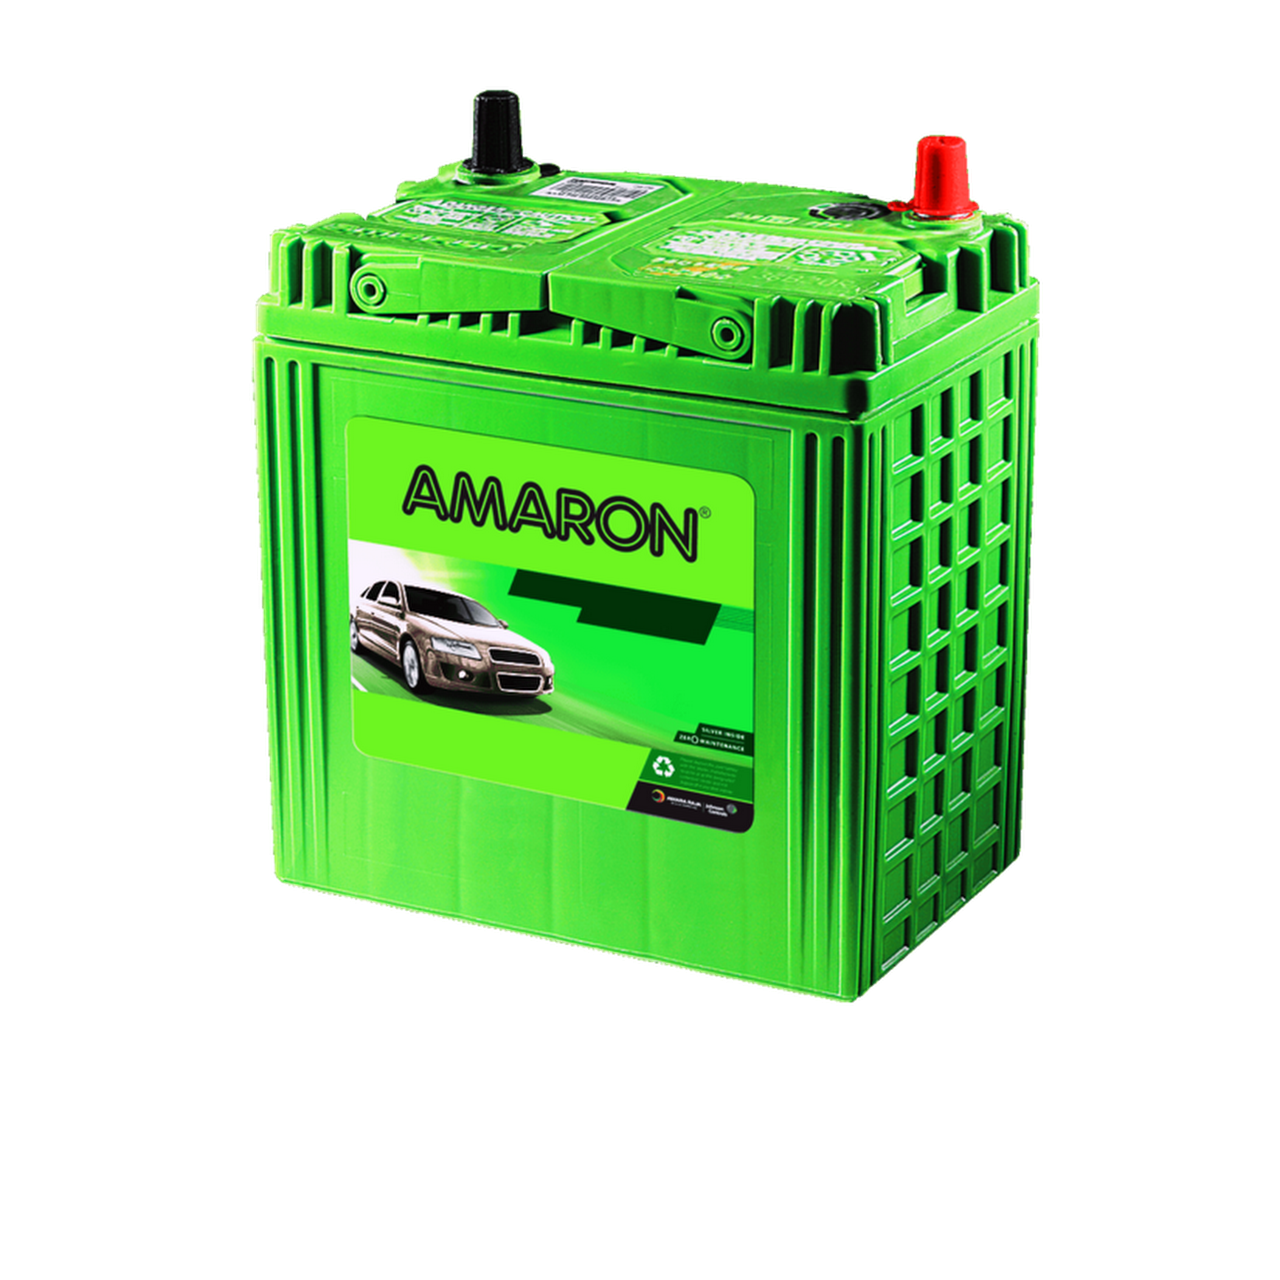 Proton Juara Amaron Battery Product for quote